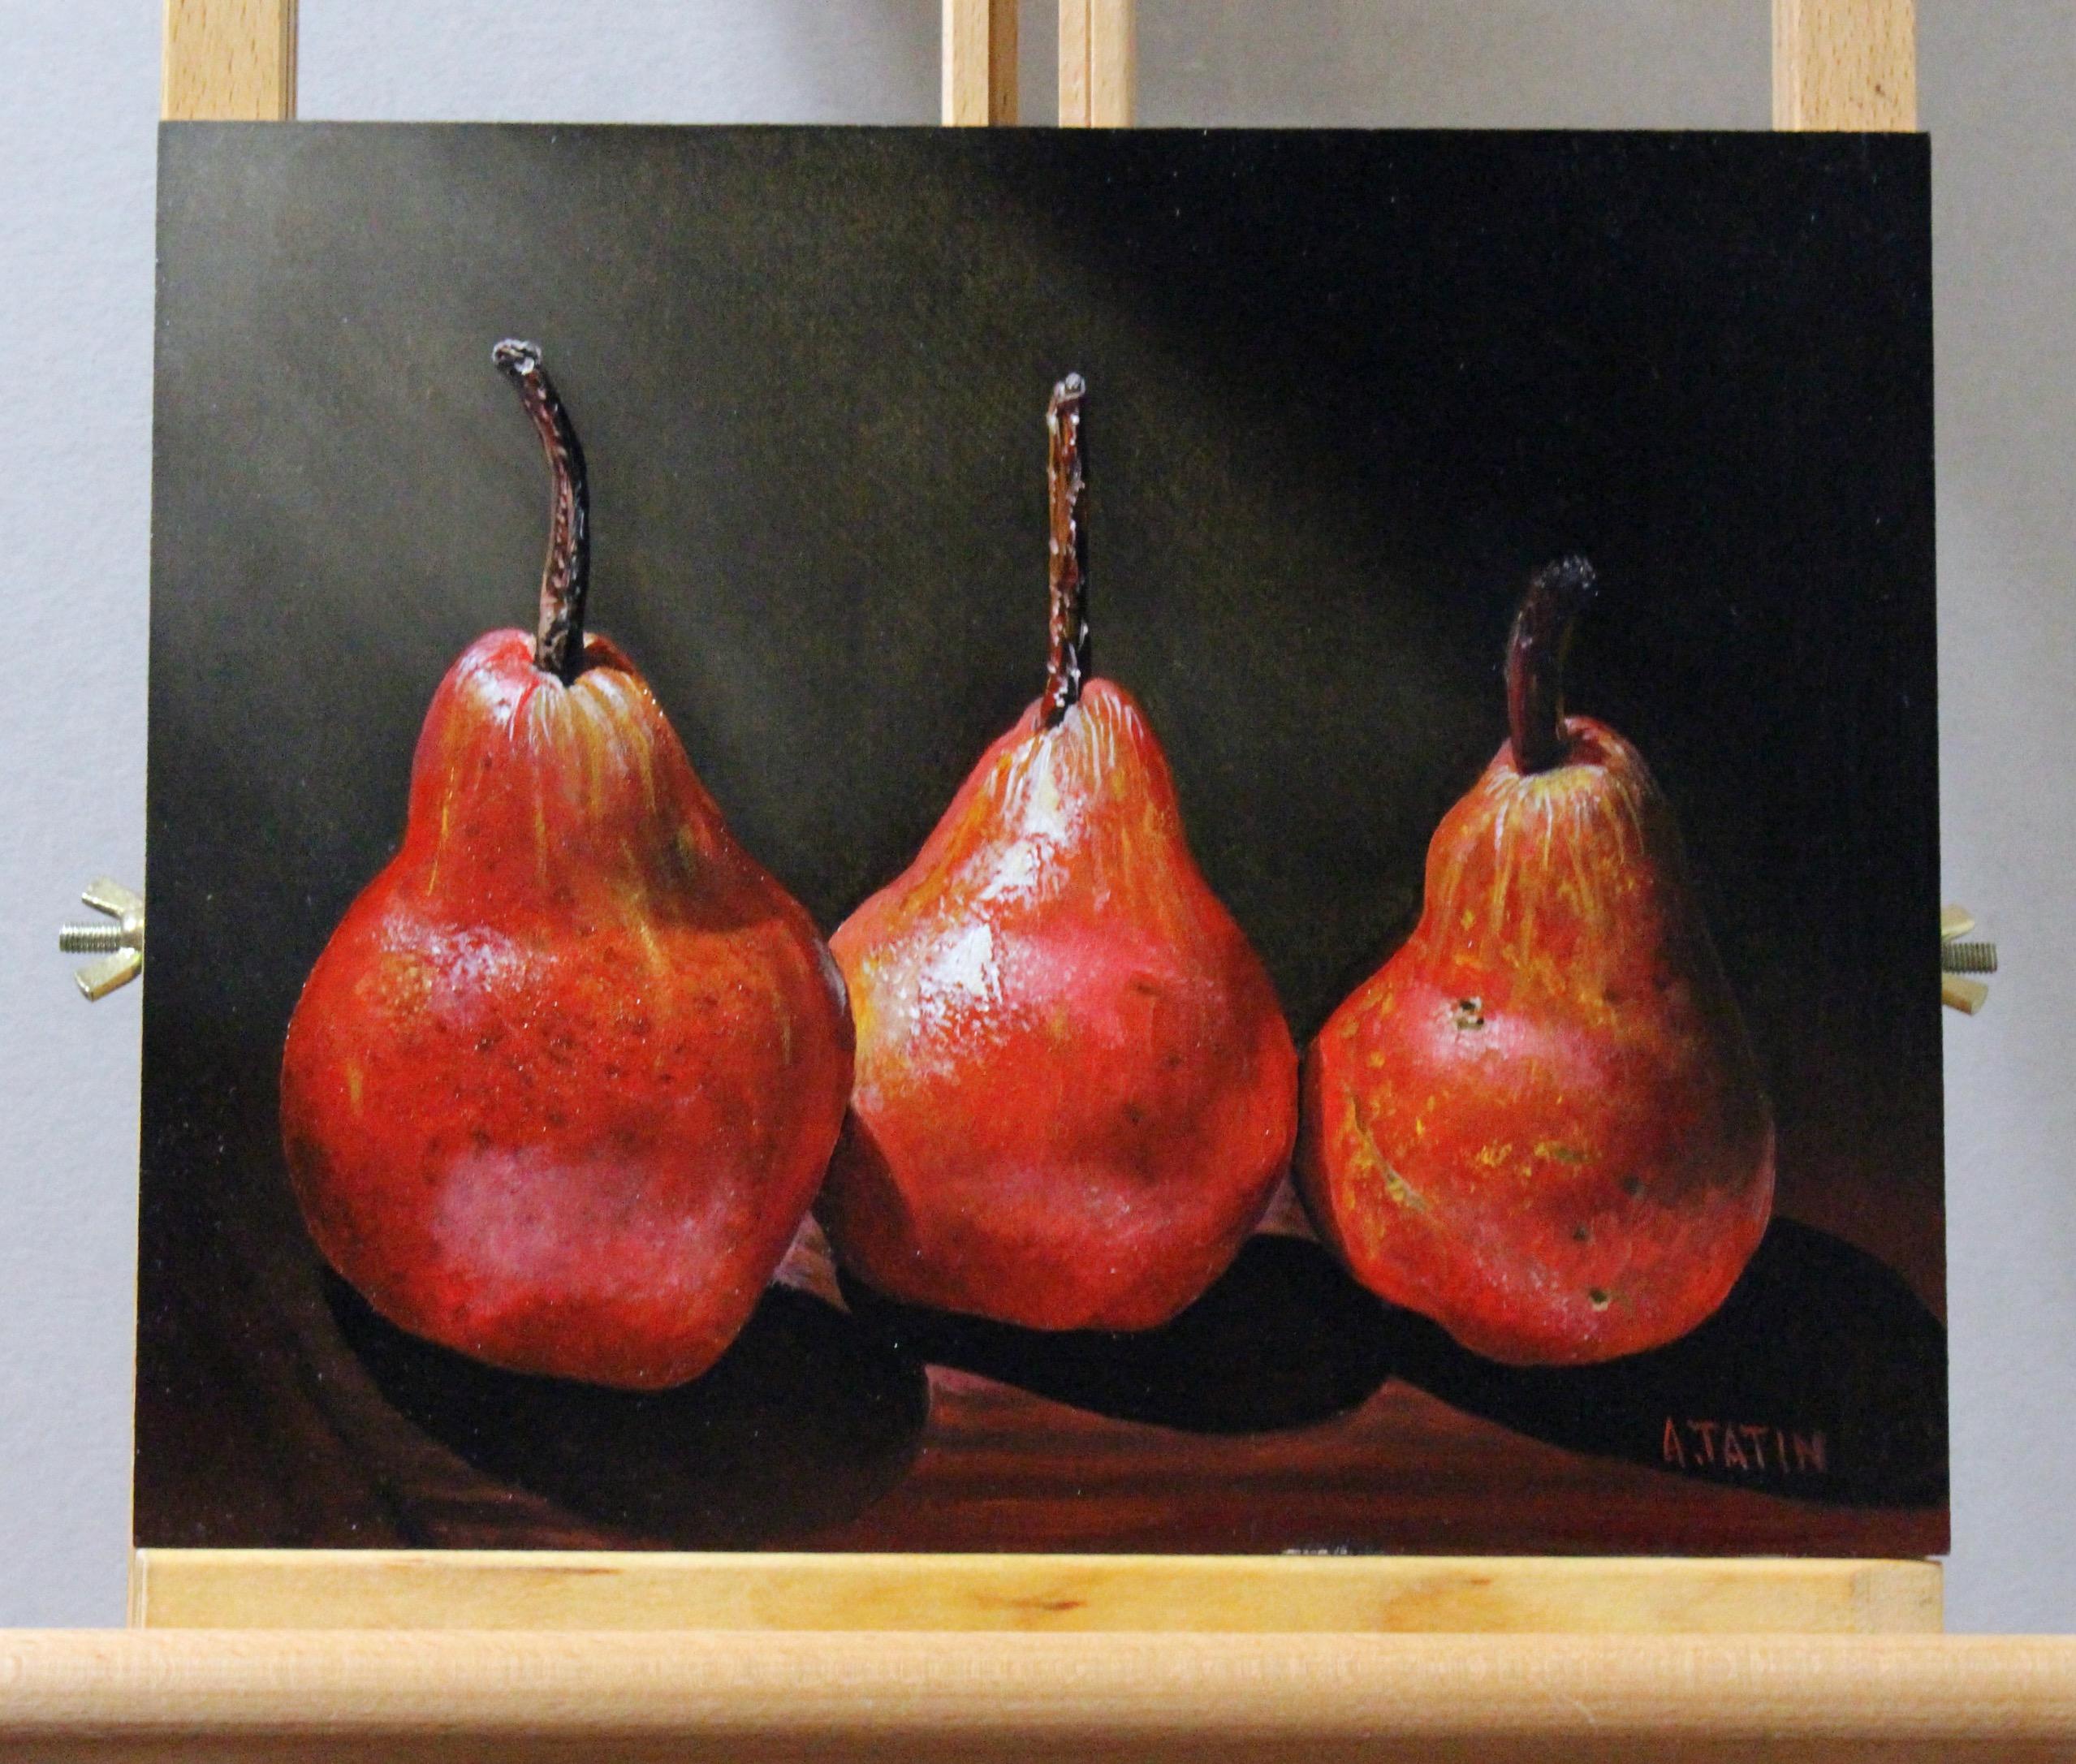 <p>Artist Comments<br>This still-life oil painting vividly portrays three overripe pears featuring wrinkled stems and noticeable discoloration on their skins. With the light shining on them, the fruits command attention and exude a profound beauty